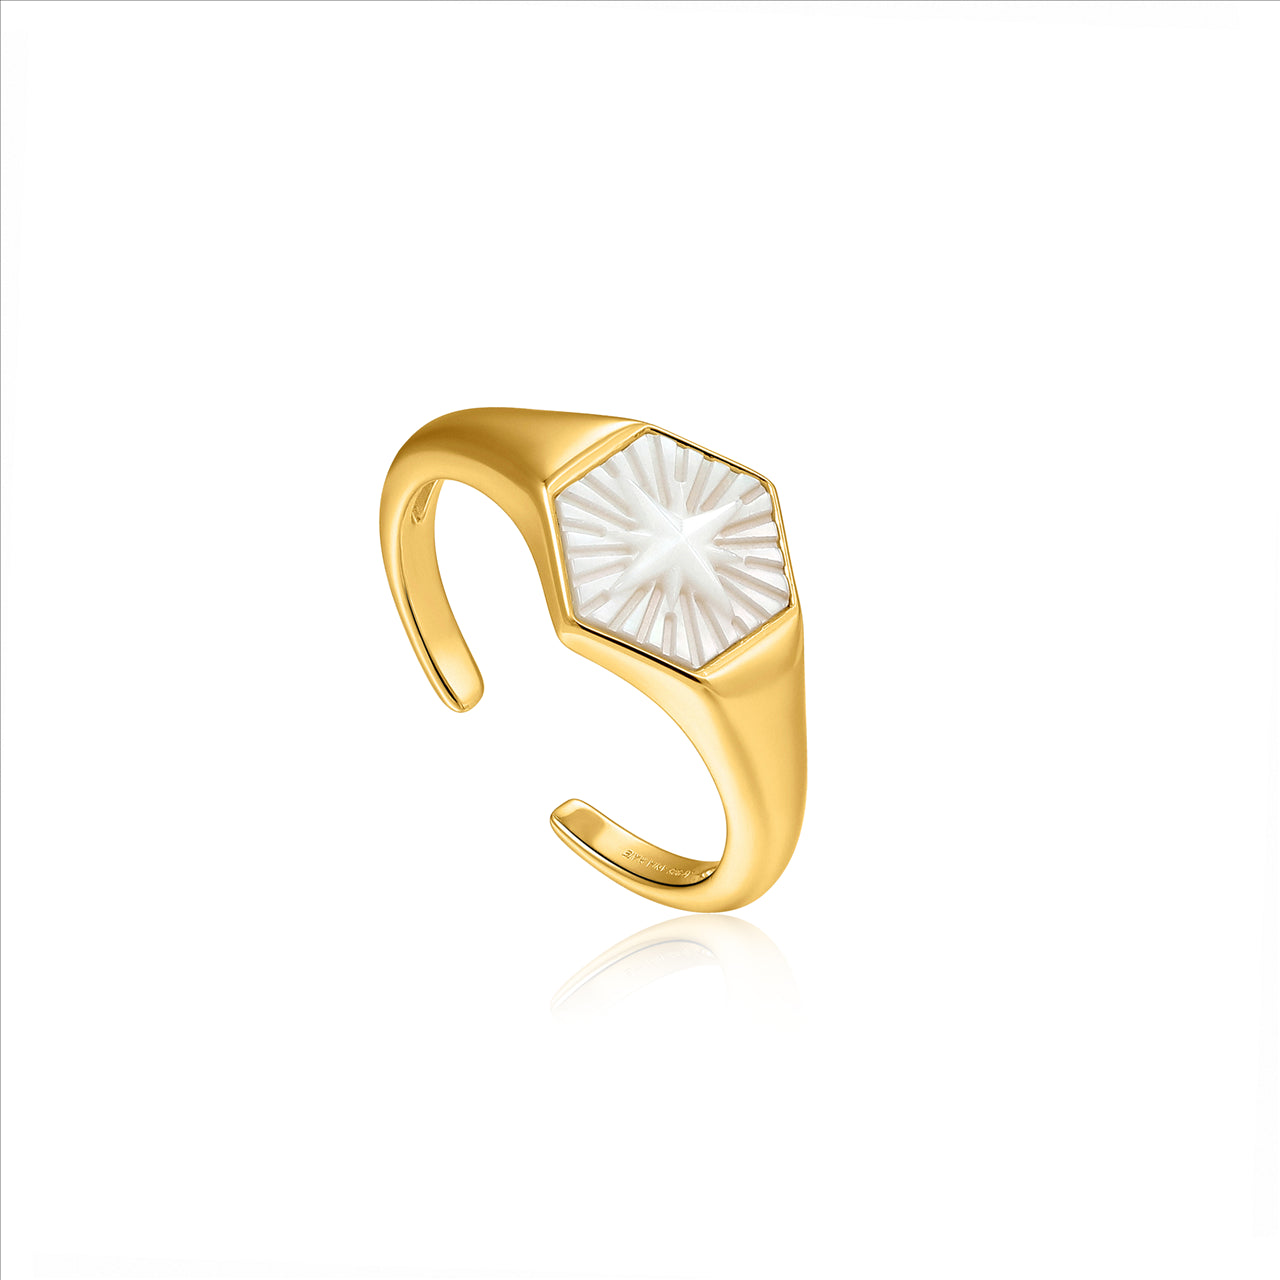 Ania Haie Compass Emblem Gold Adjustable Ring